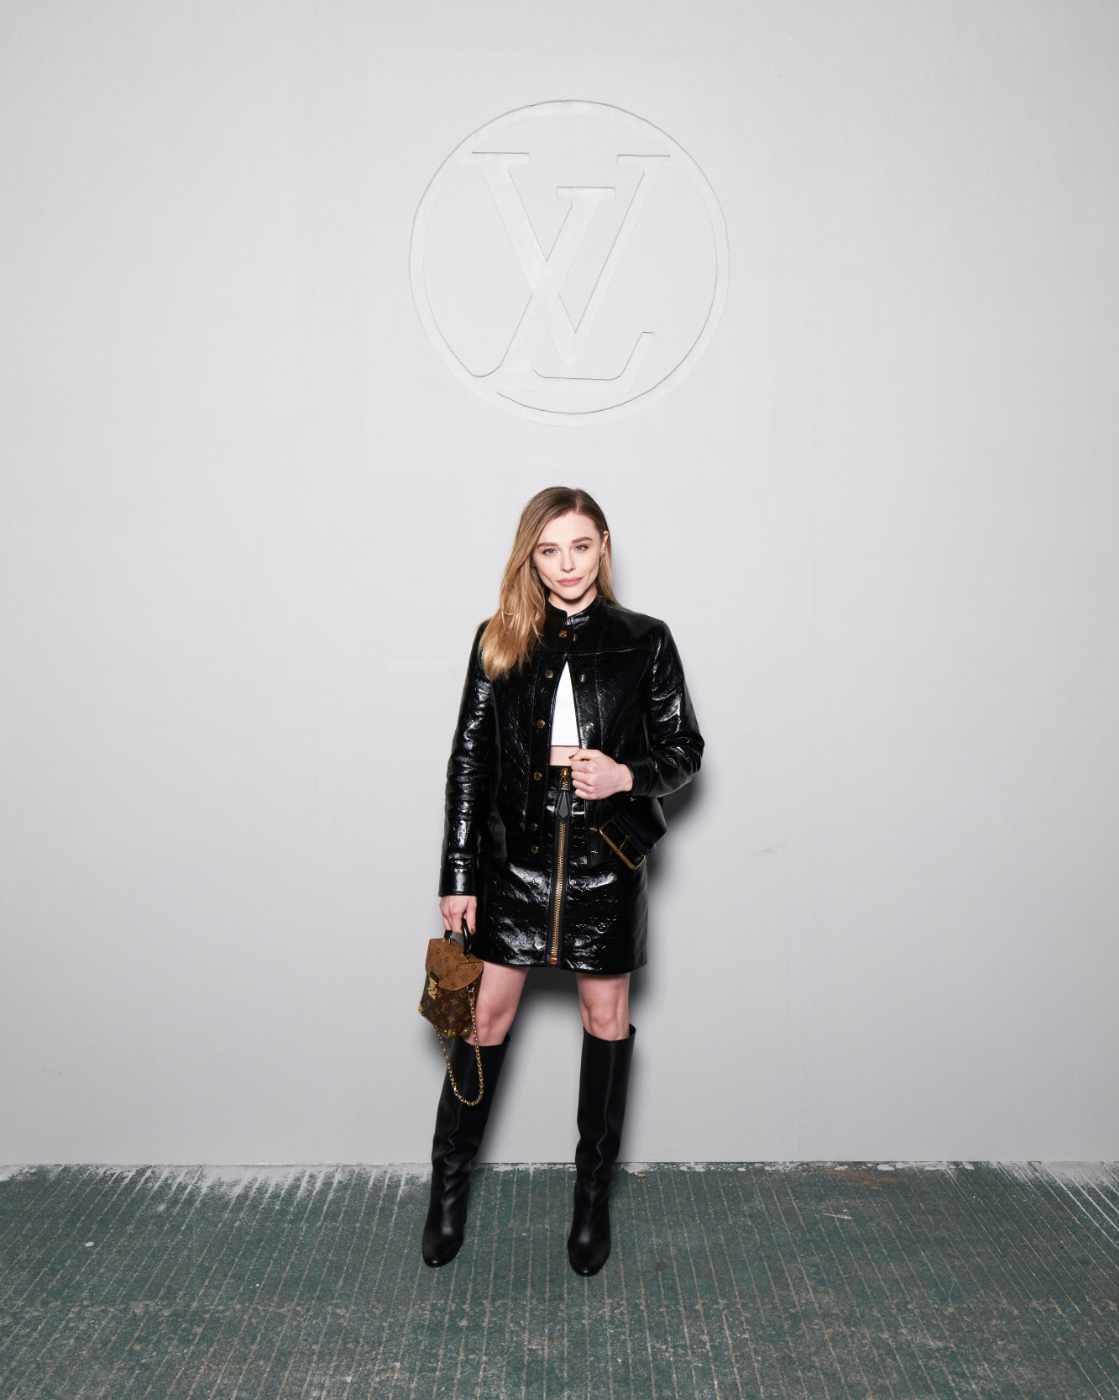 Louis Vuitton Pre-Fall 2023 Show To Dazzle Seoul With Squid Game Director  As Creative Advisor Vanity Teen 虚荣青年 Lifestyle & New Faces Magazine